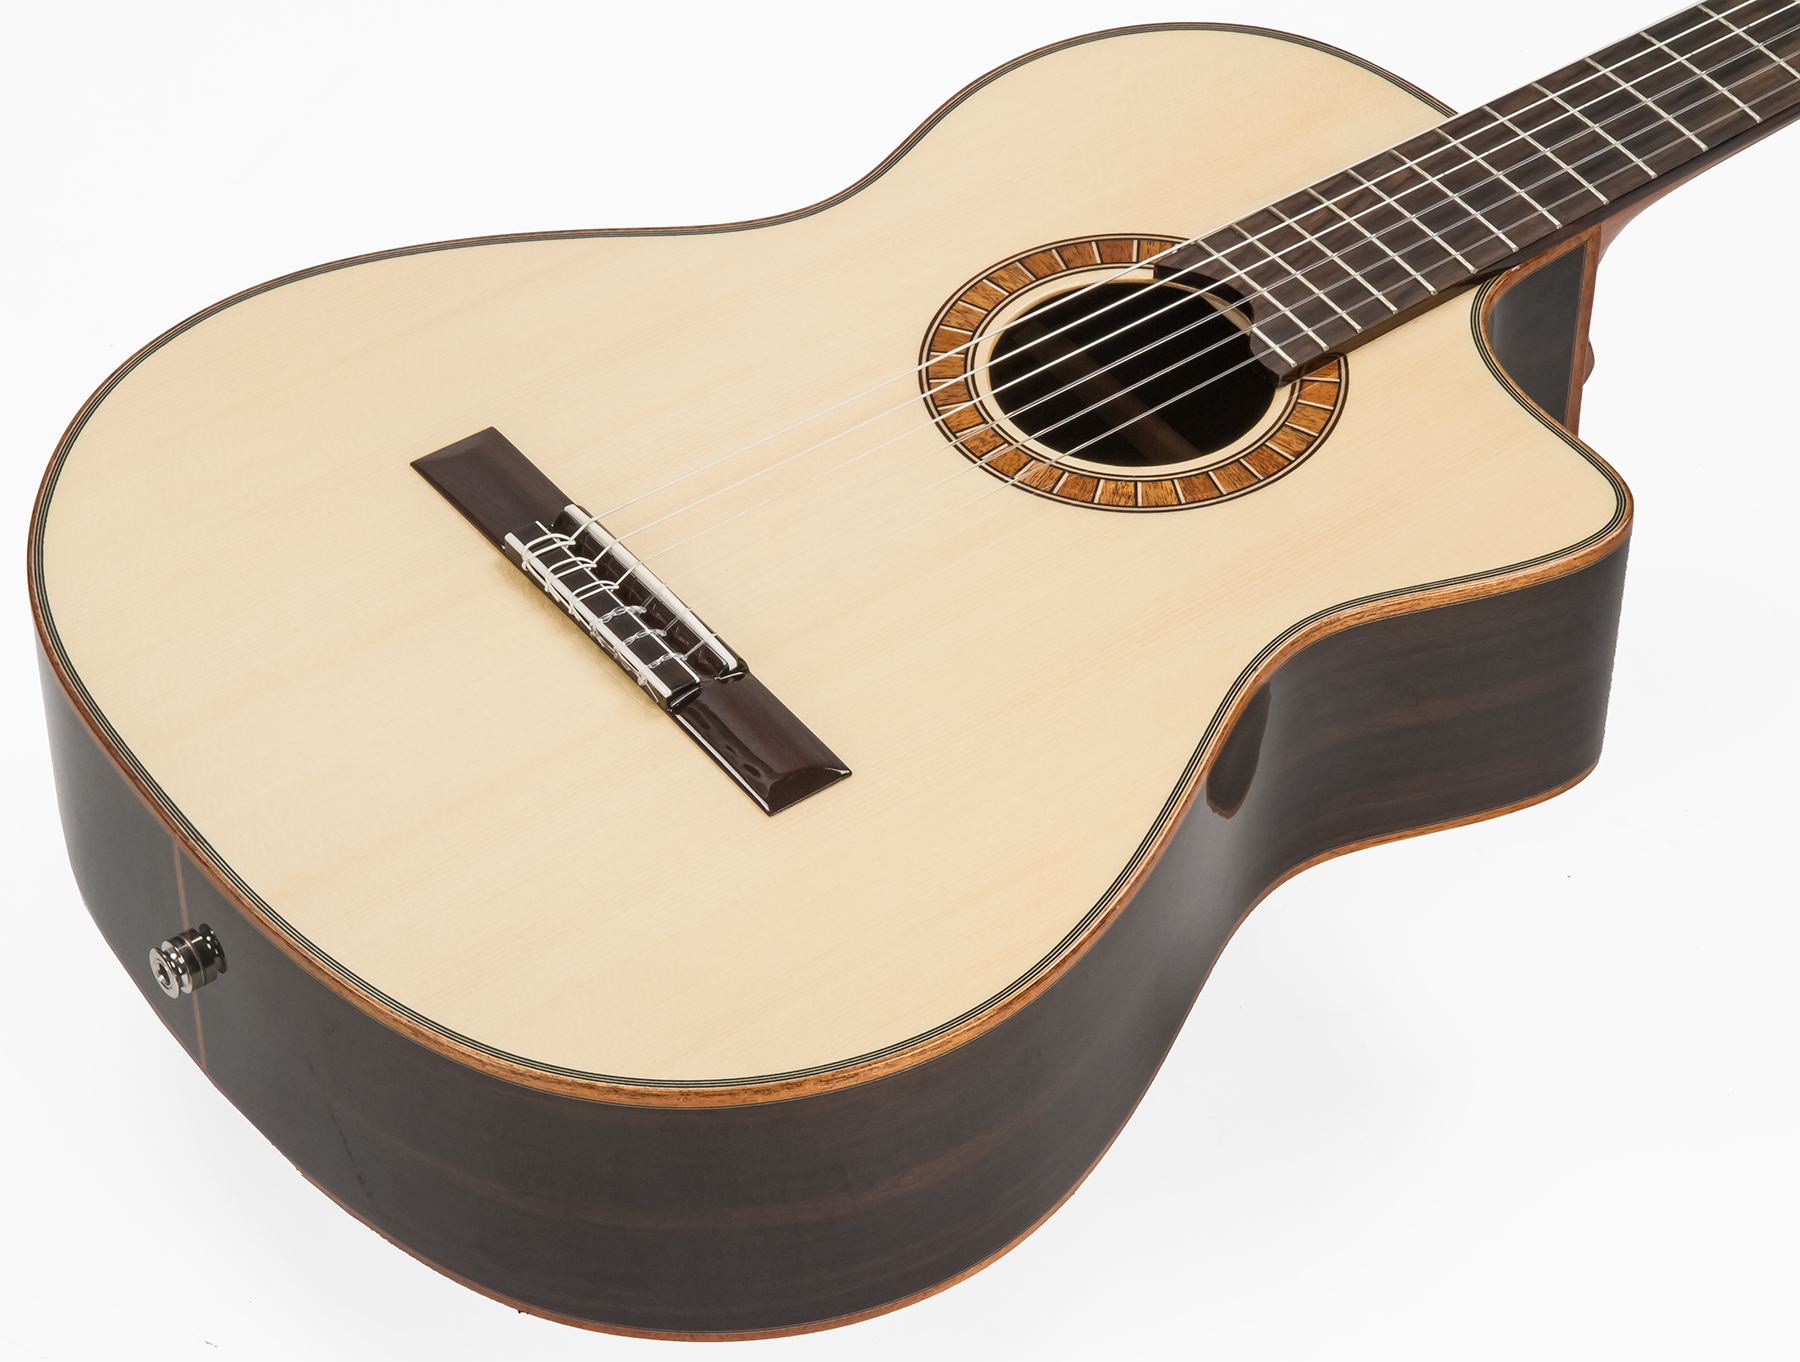 Martinez Mp12-rs Crossover Cw Epicea Palissandre Rw +housse - Natural - Classical guitar 4/4 size - Variation 1